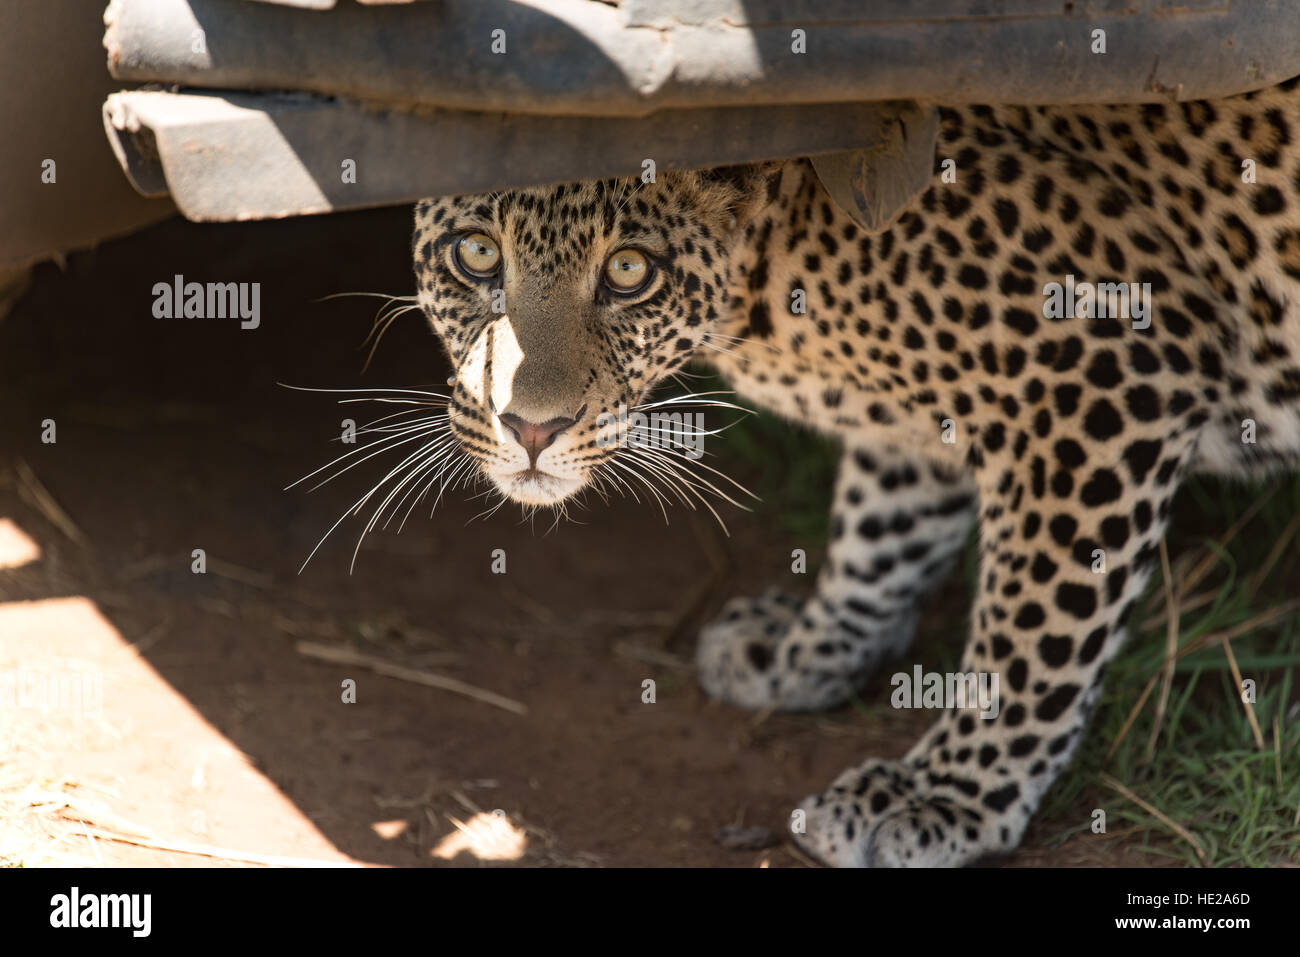 Young leopard hiding below a safari car in the Serengeti national park. The feline seams to be axious about the numerous cars around. Stock Photo